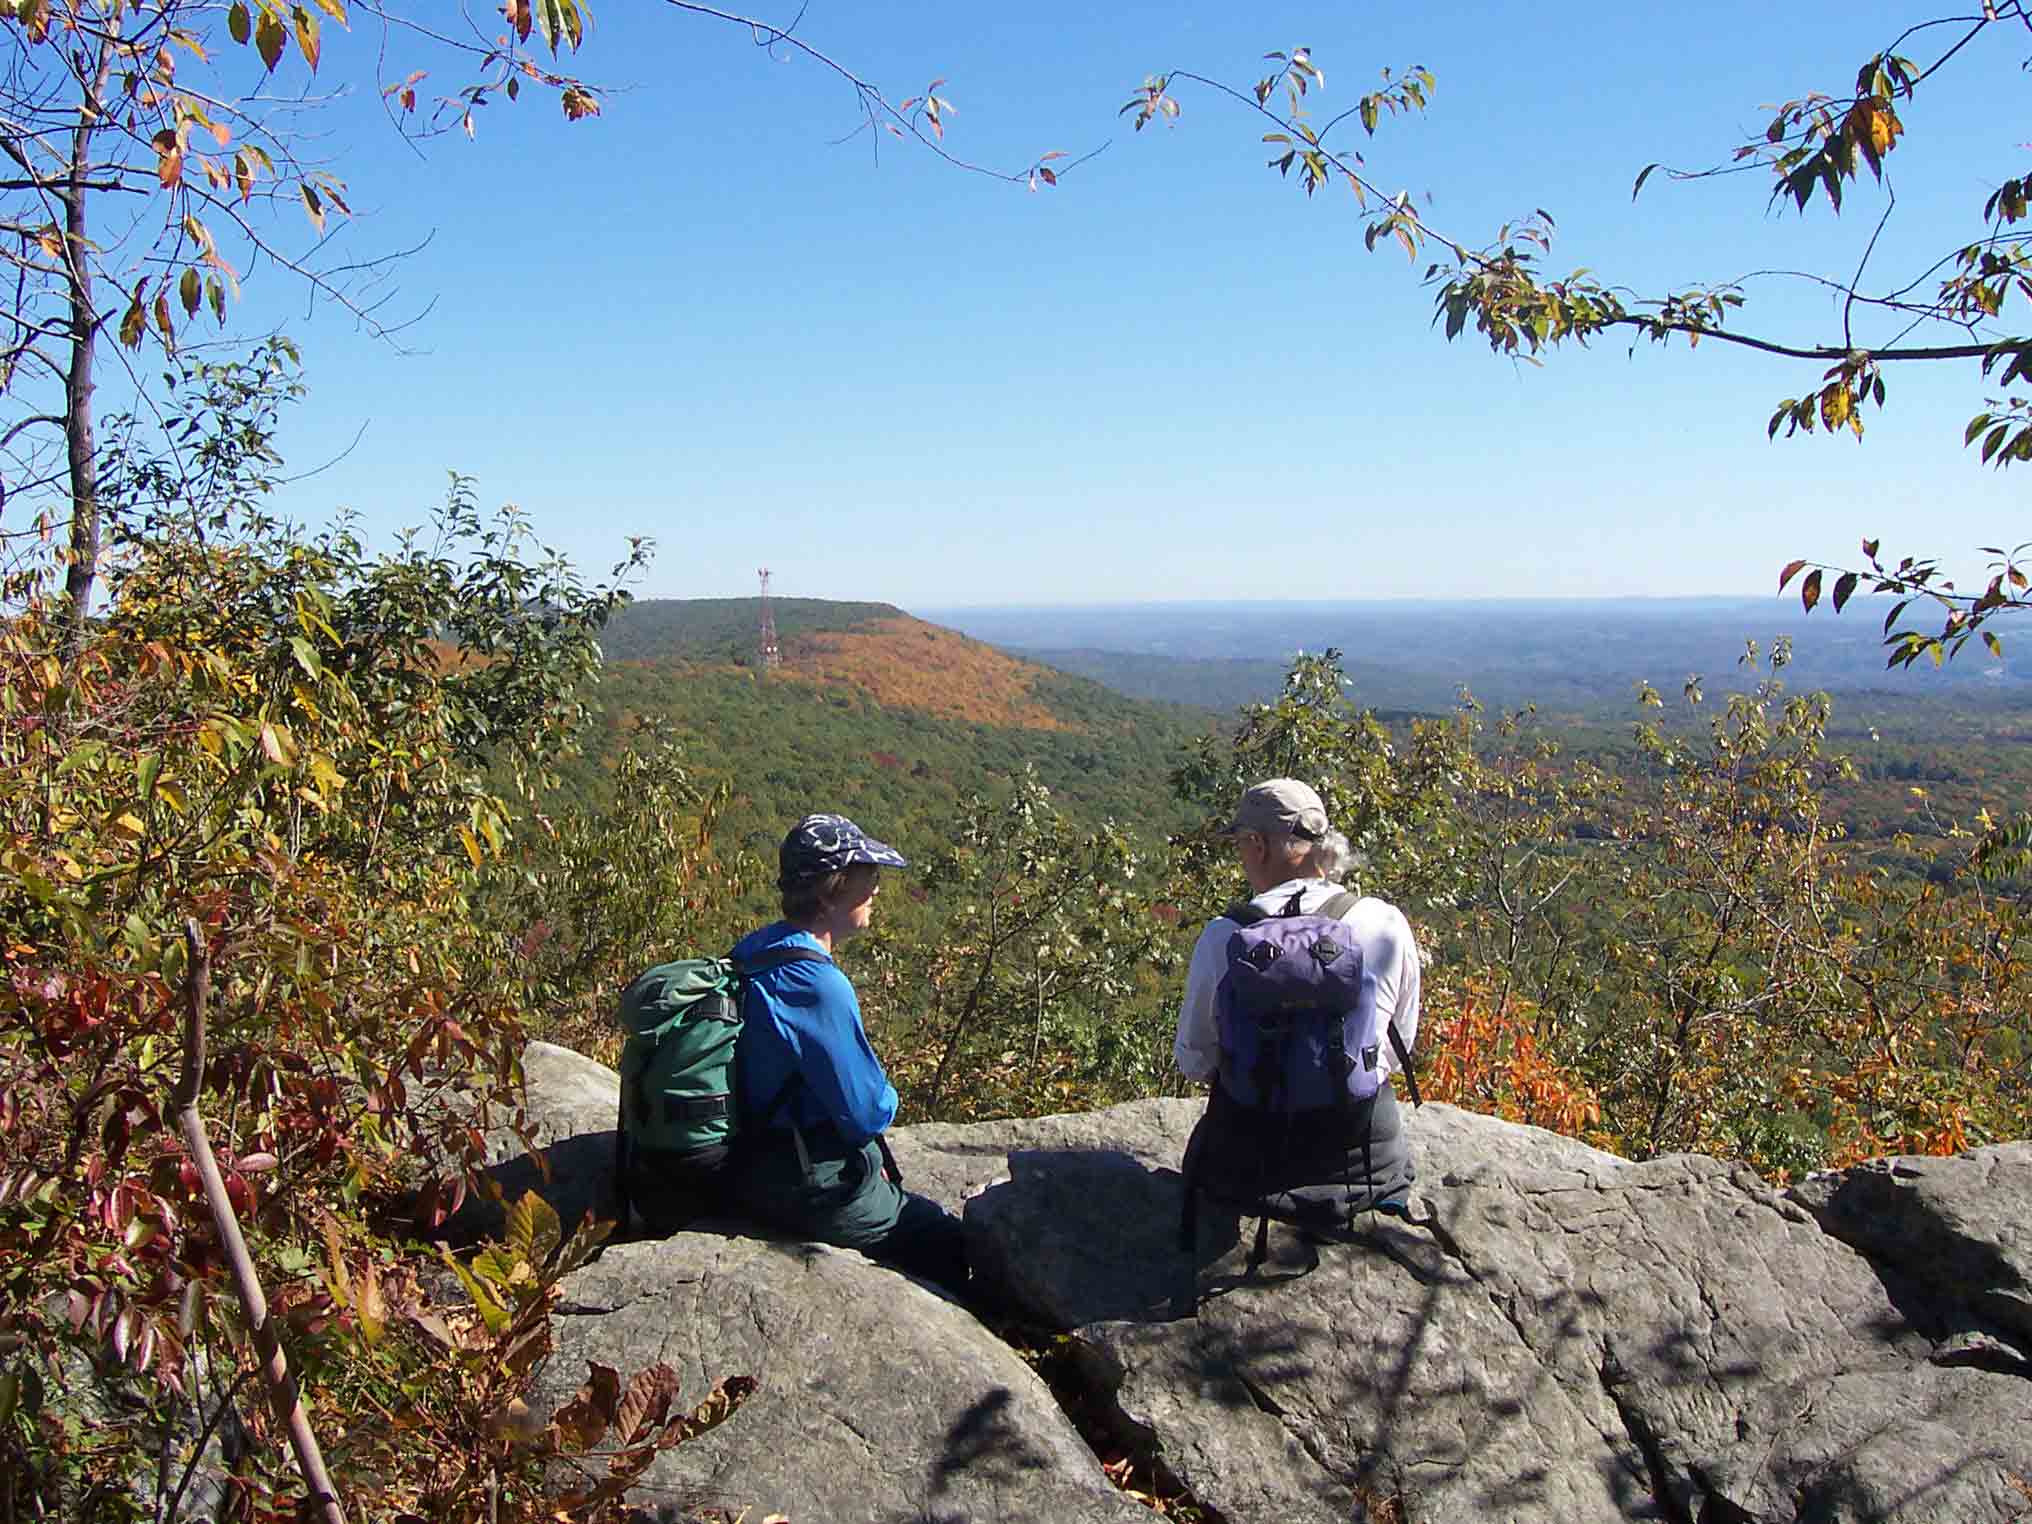 mm 5.8 - Barry and Marsha admiring view from Lunch Rocks  Courtesy dlcul@conncoll.edu